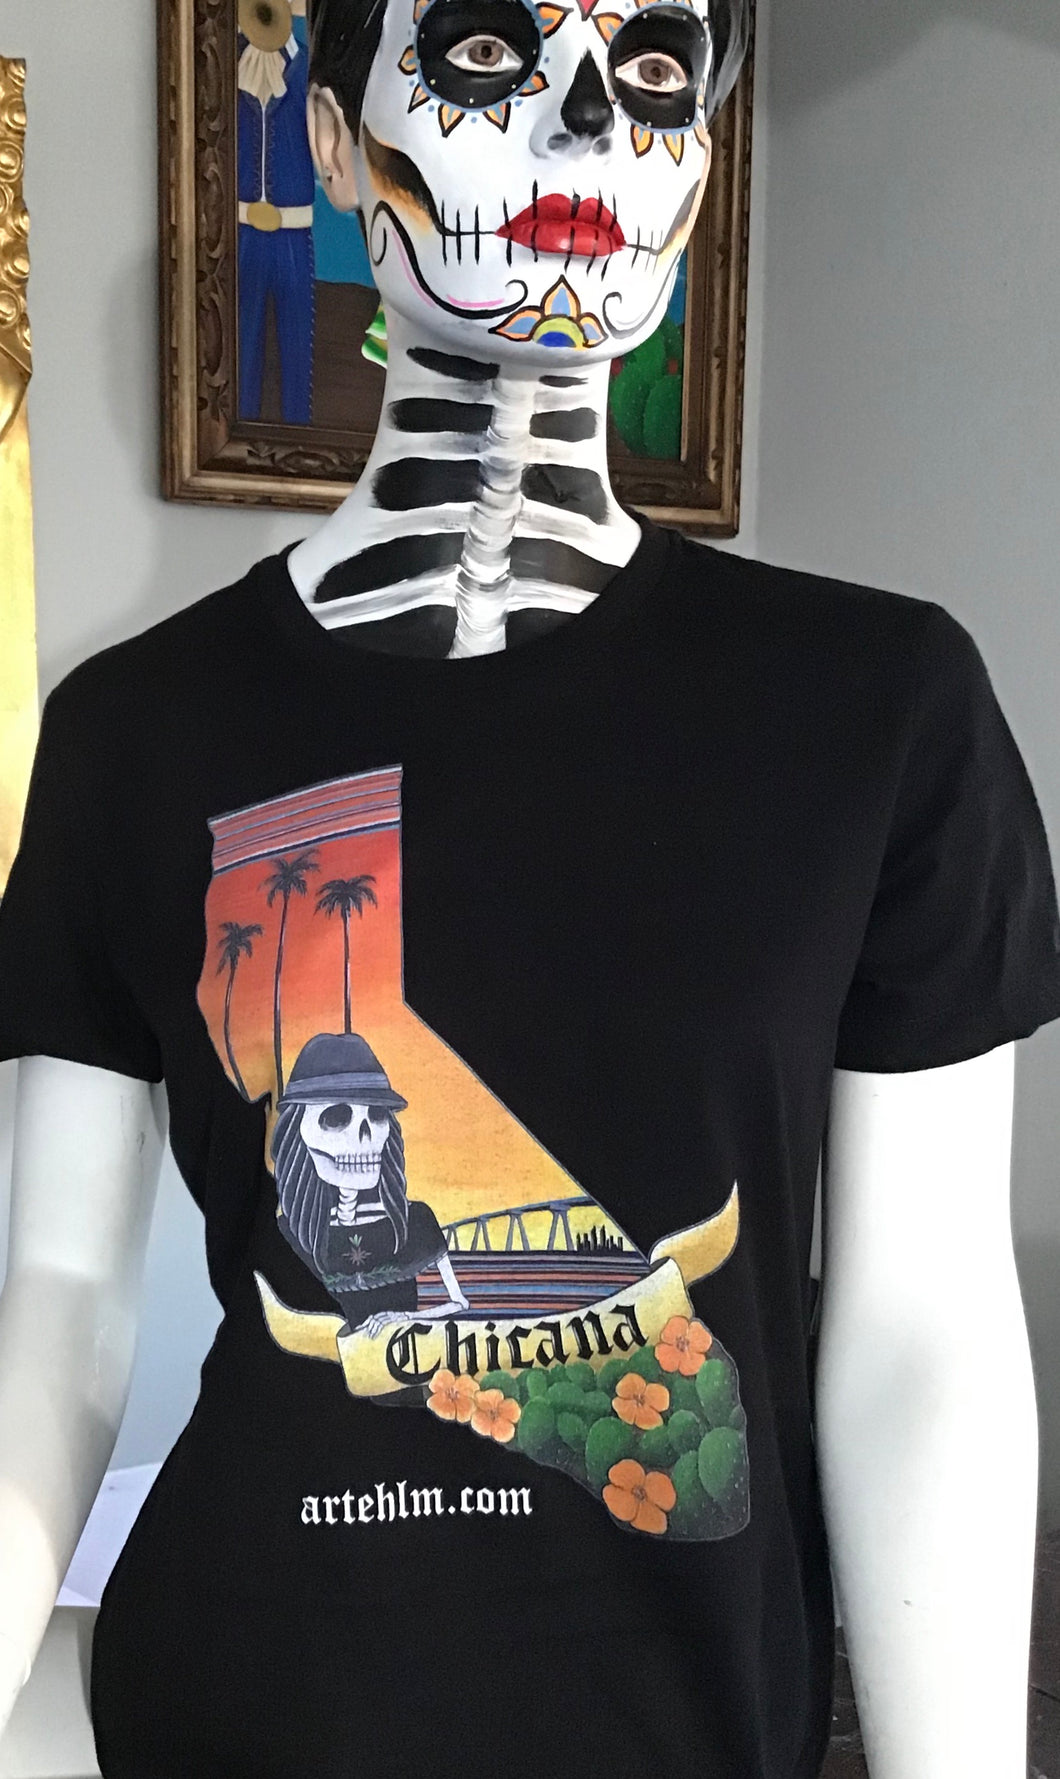 T-shirt- Chicana Woman’s fitted tee